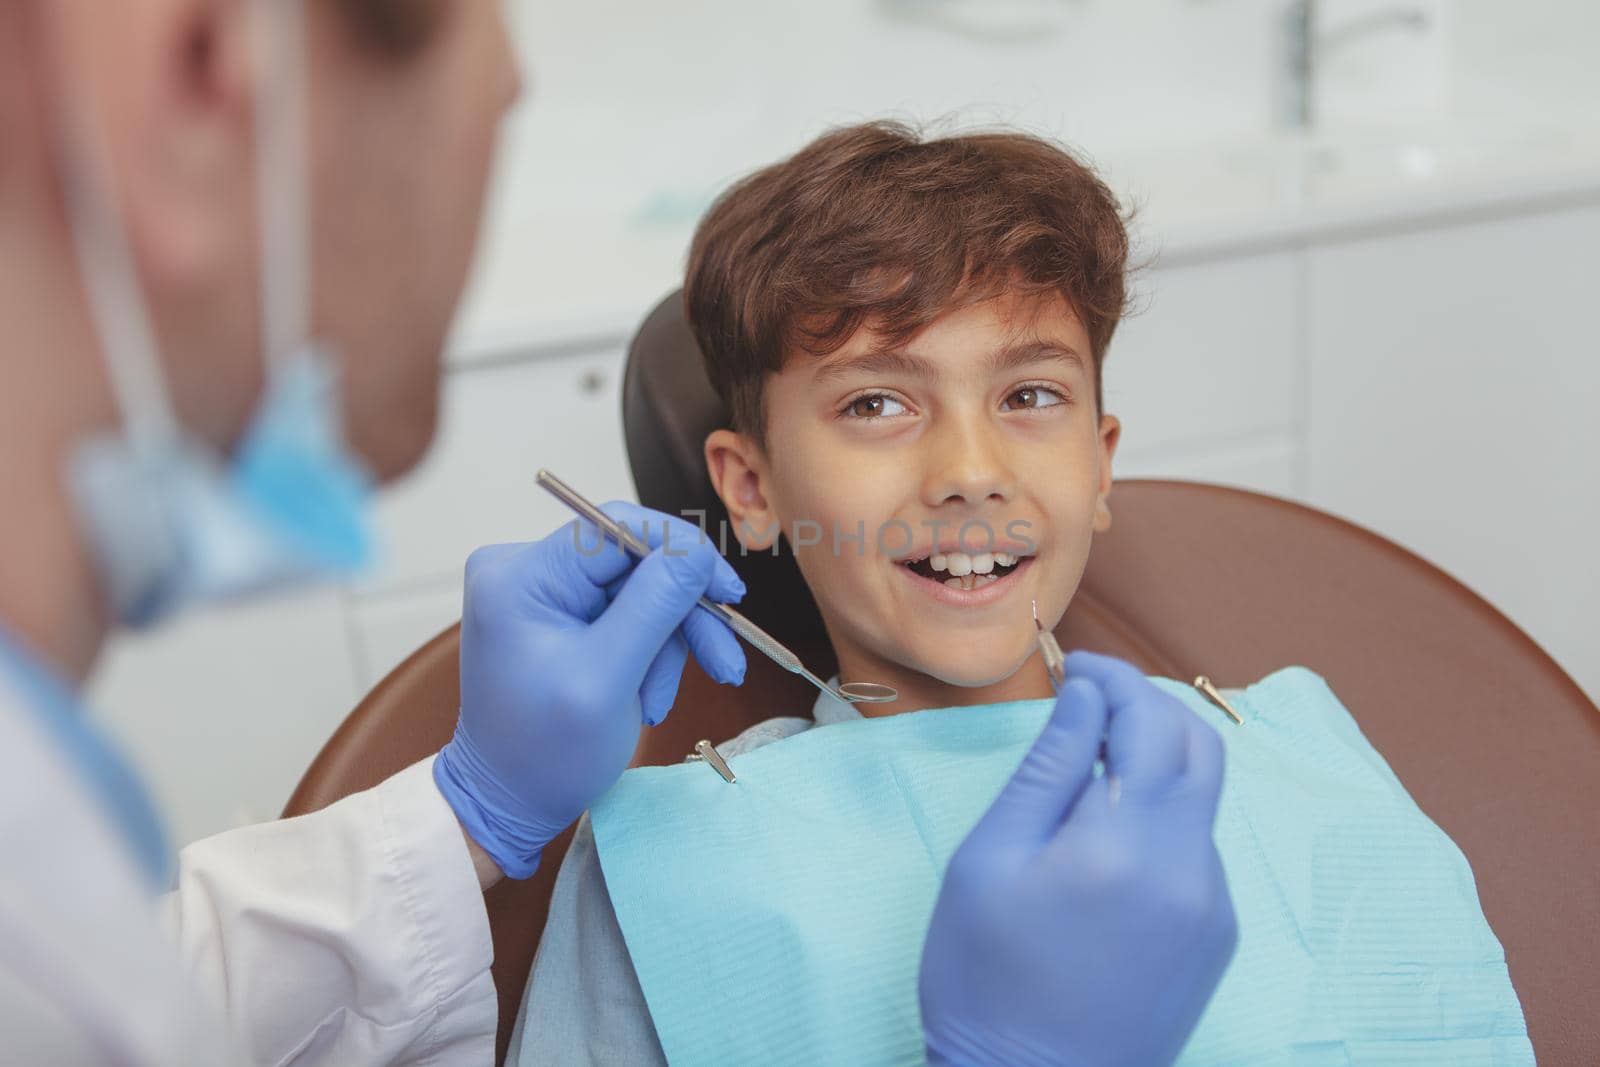 Adorable young boy visiting dentist, having his teeth checked by dentist. Lovely happy kid smiling with healthy teeth, getting his dental examination